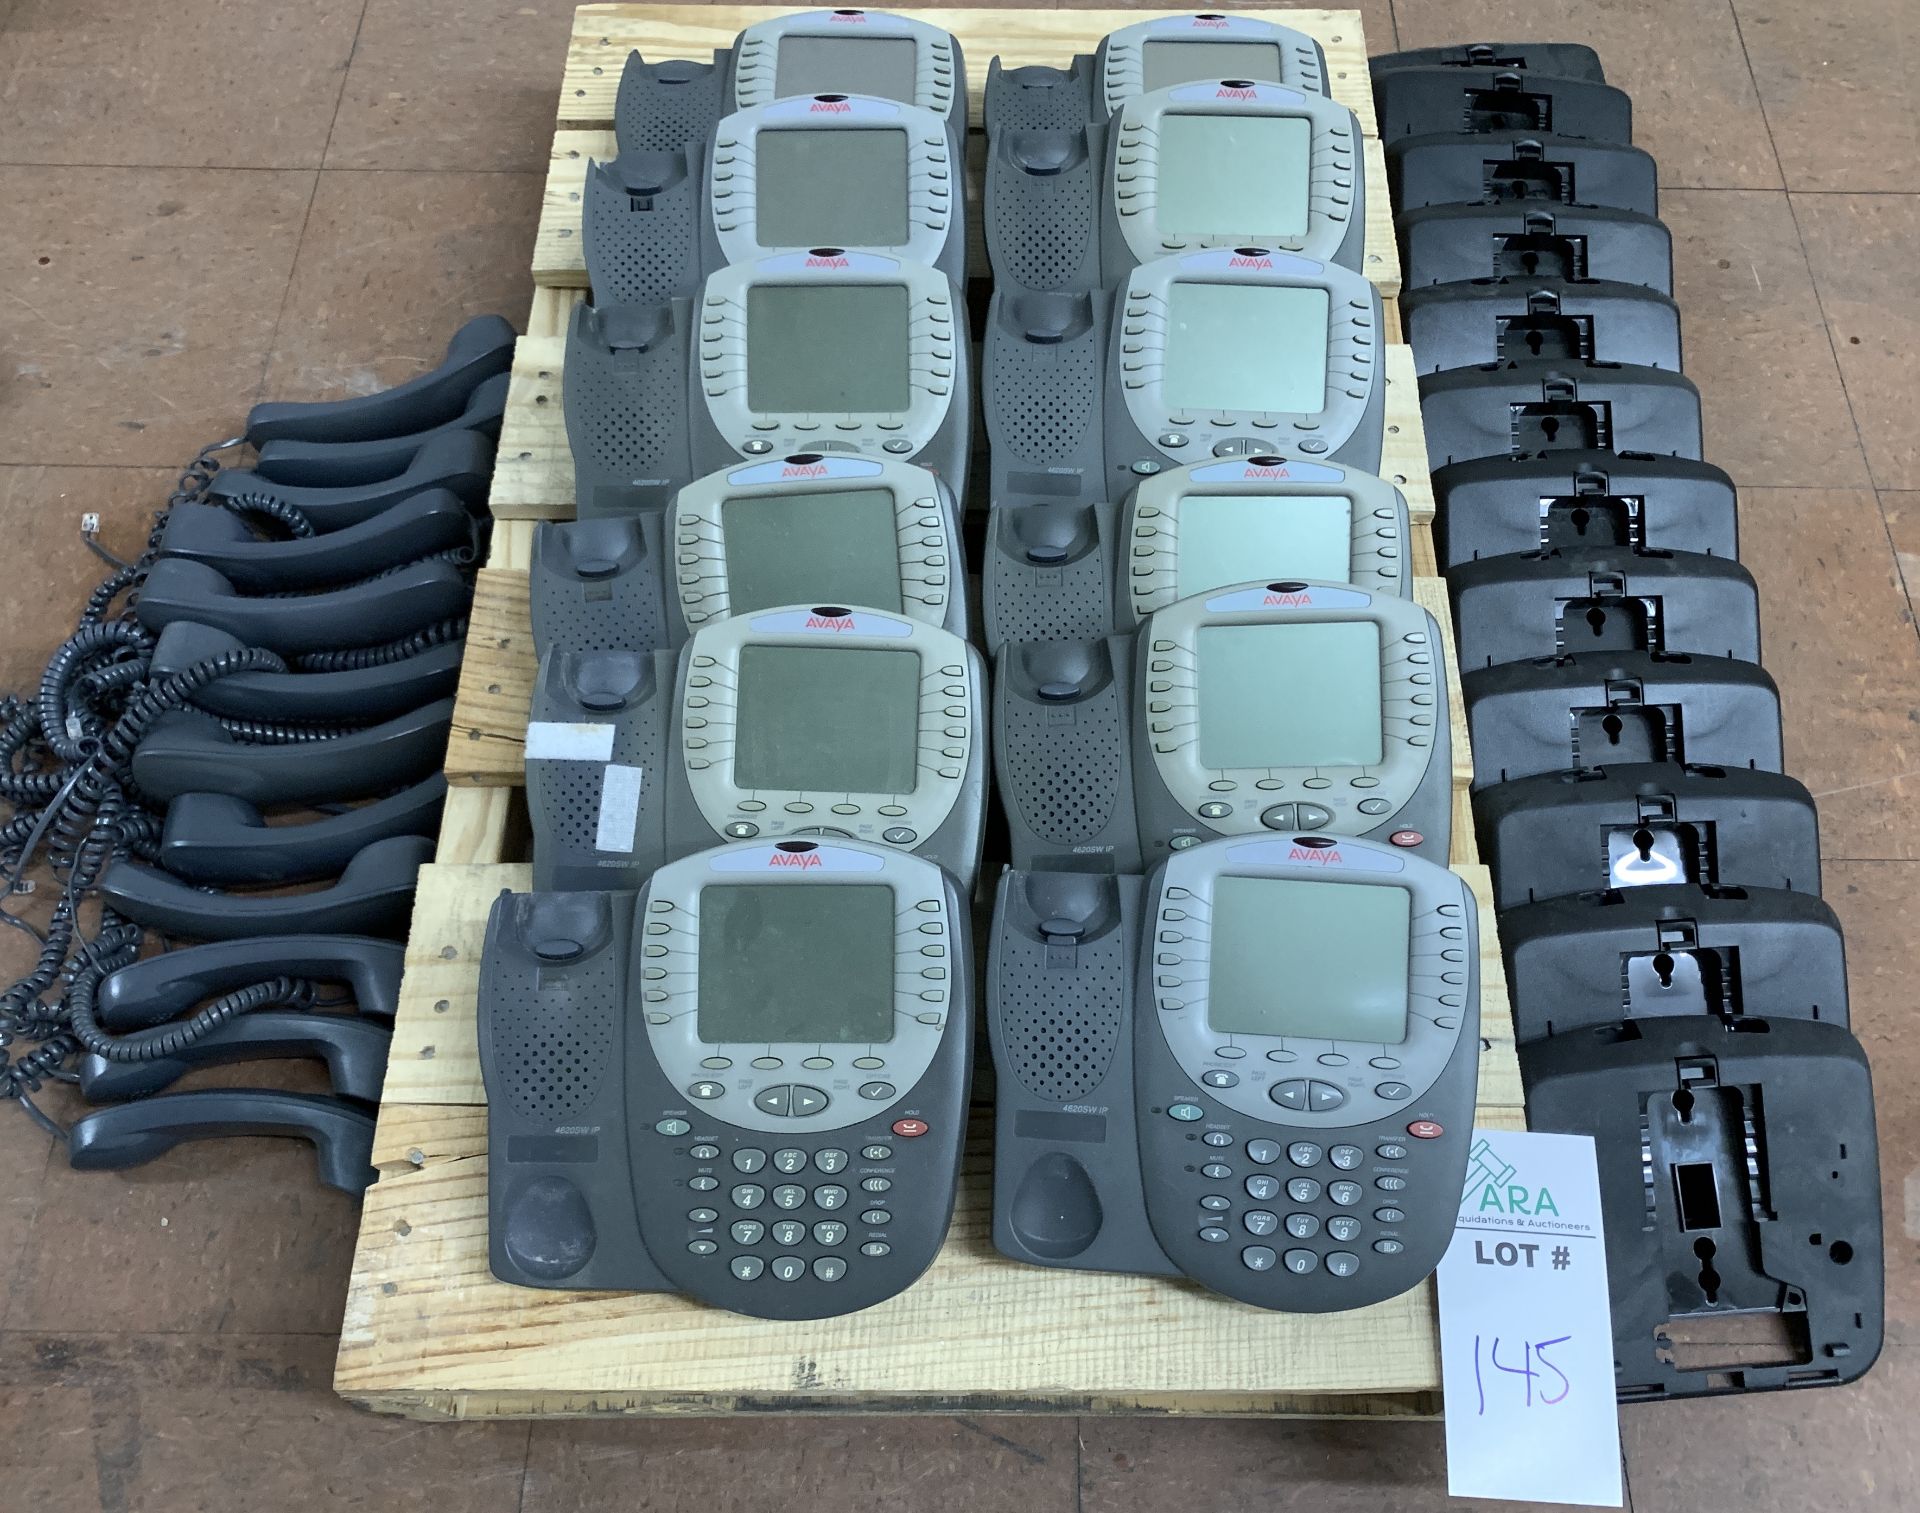 12 AVAYA PHONE HANDSETS, MODEL 4620SW IPALL ITEMS ARE SOLD AS IS UNTESTED BUT CAME FROM A WORKING - Image 2 of 4